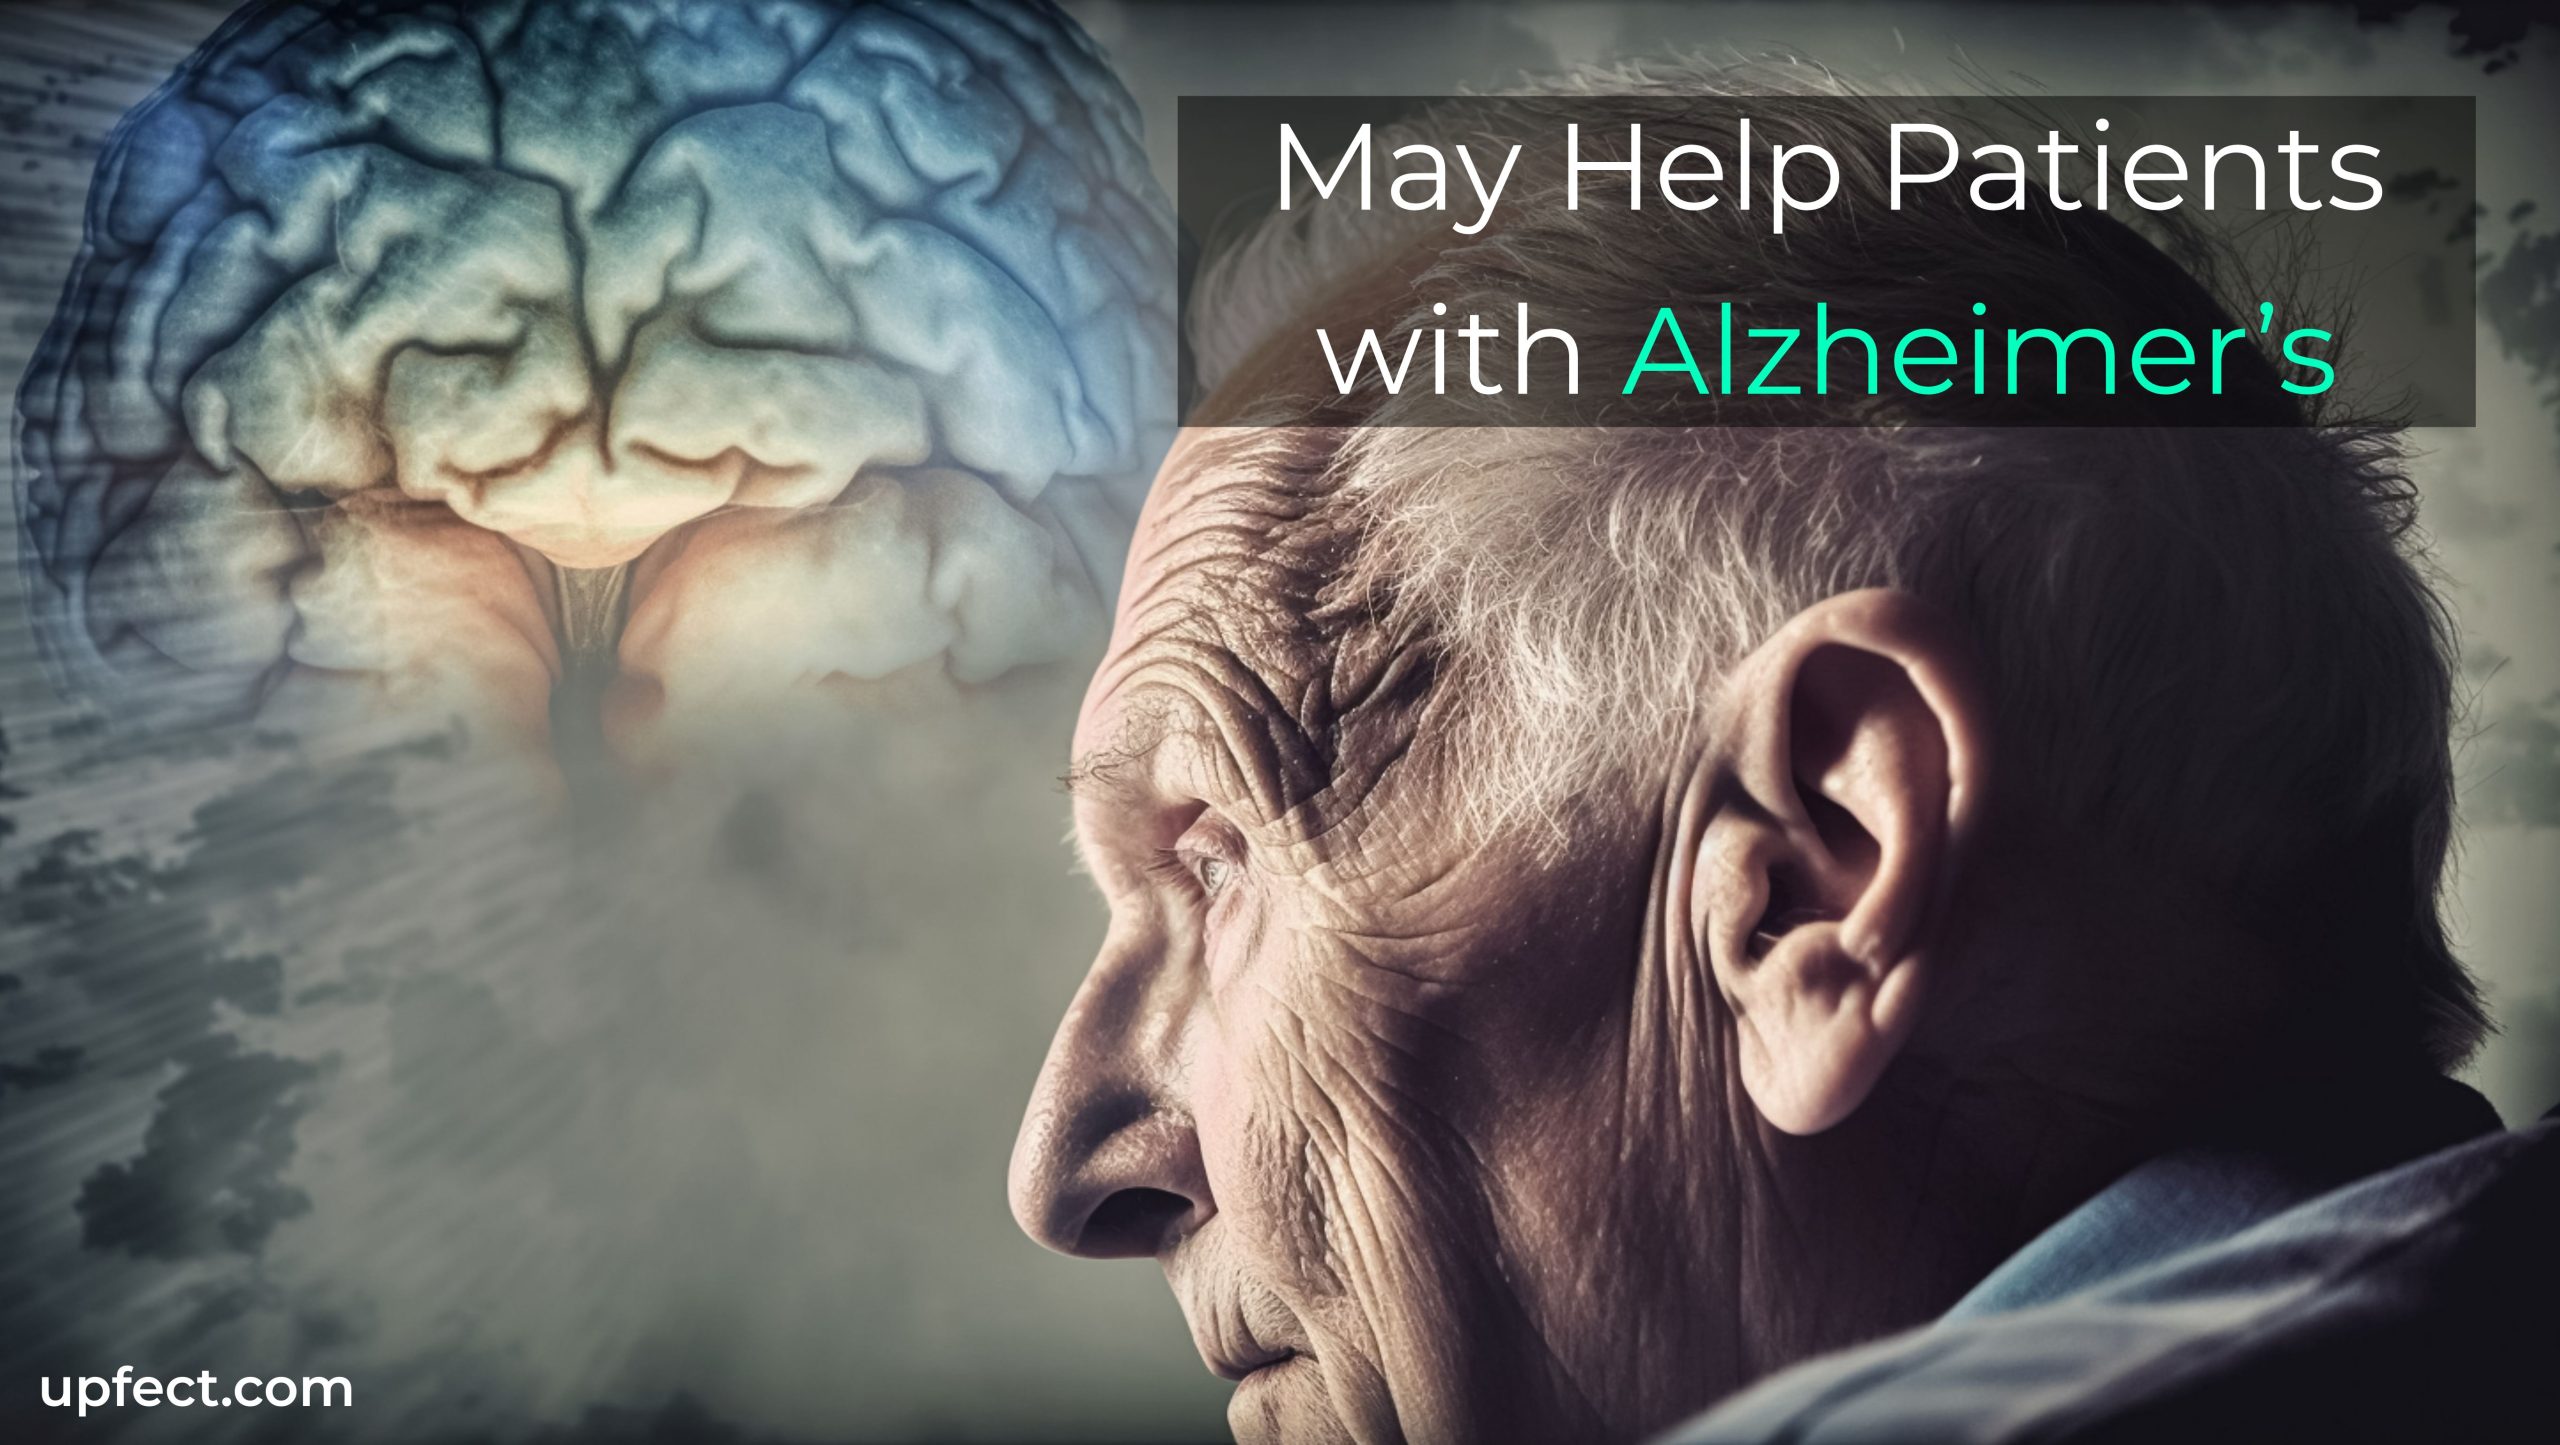 May Help Patients with Alzheimer’s